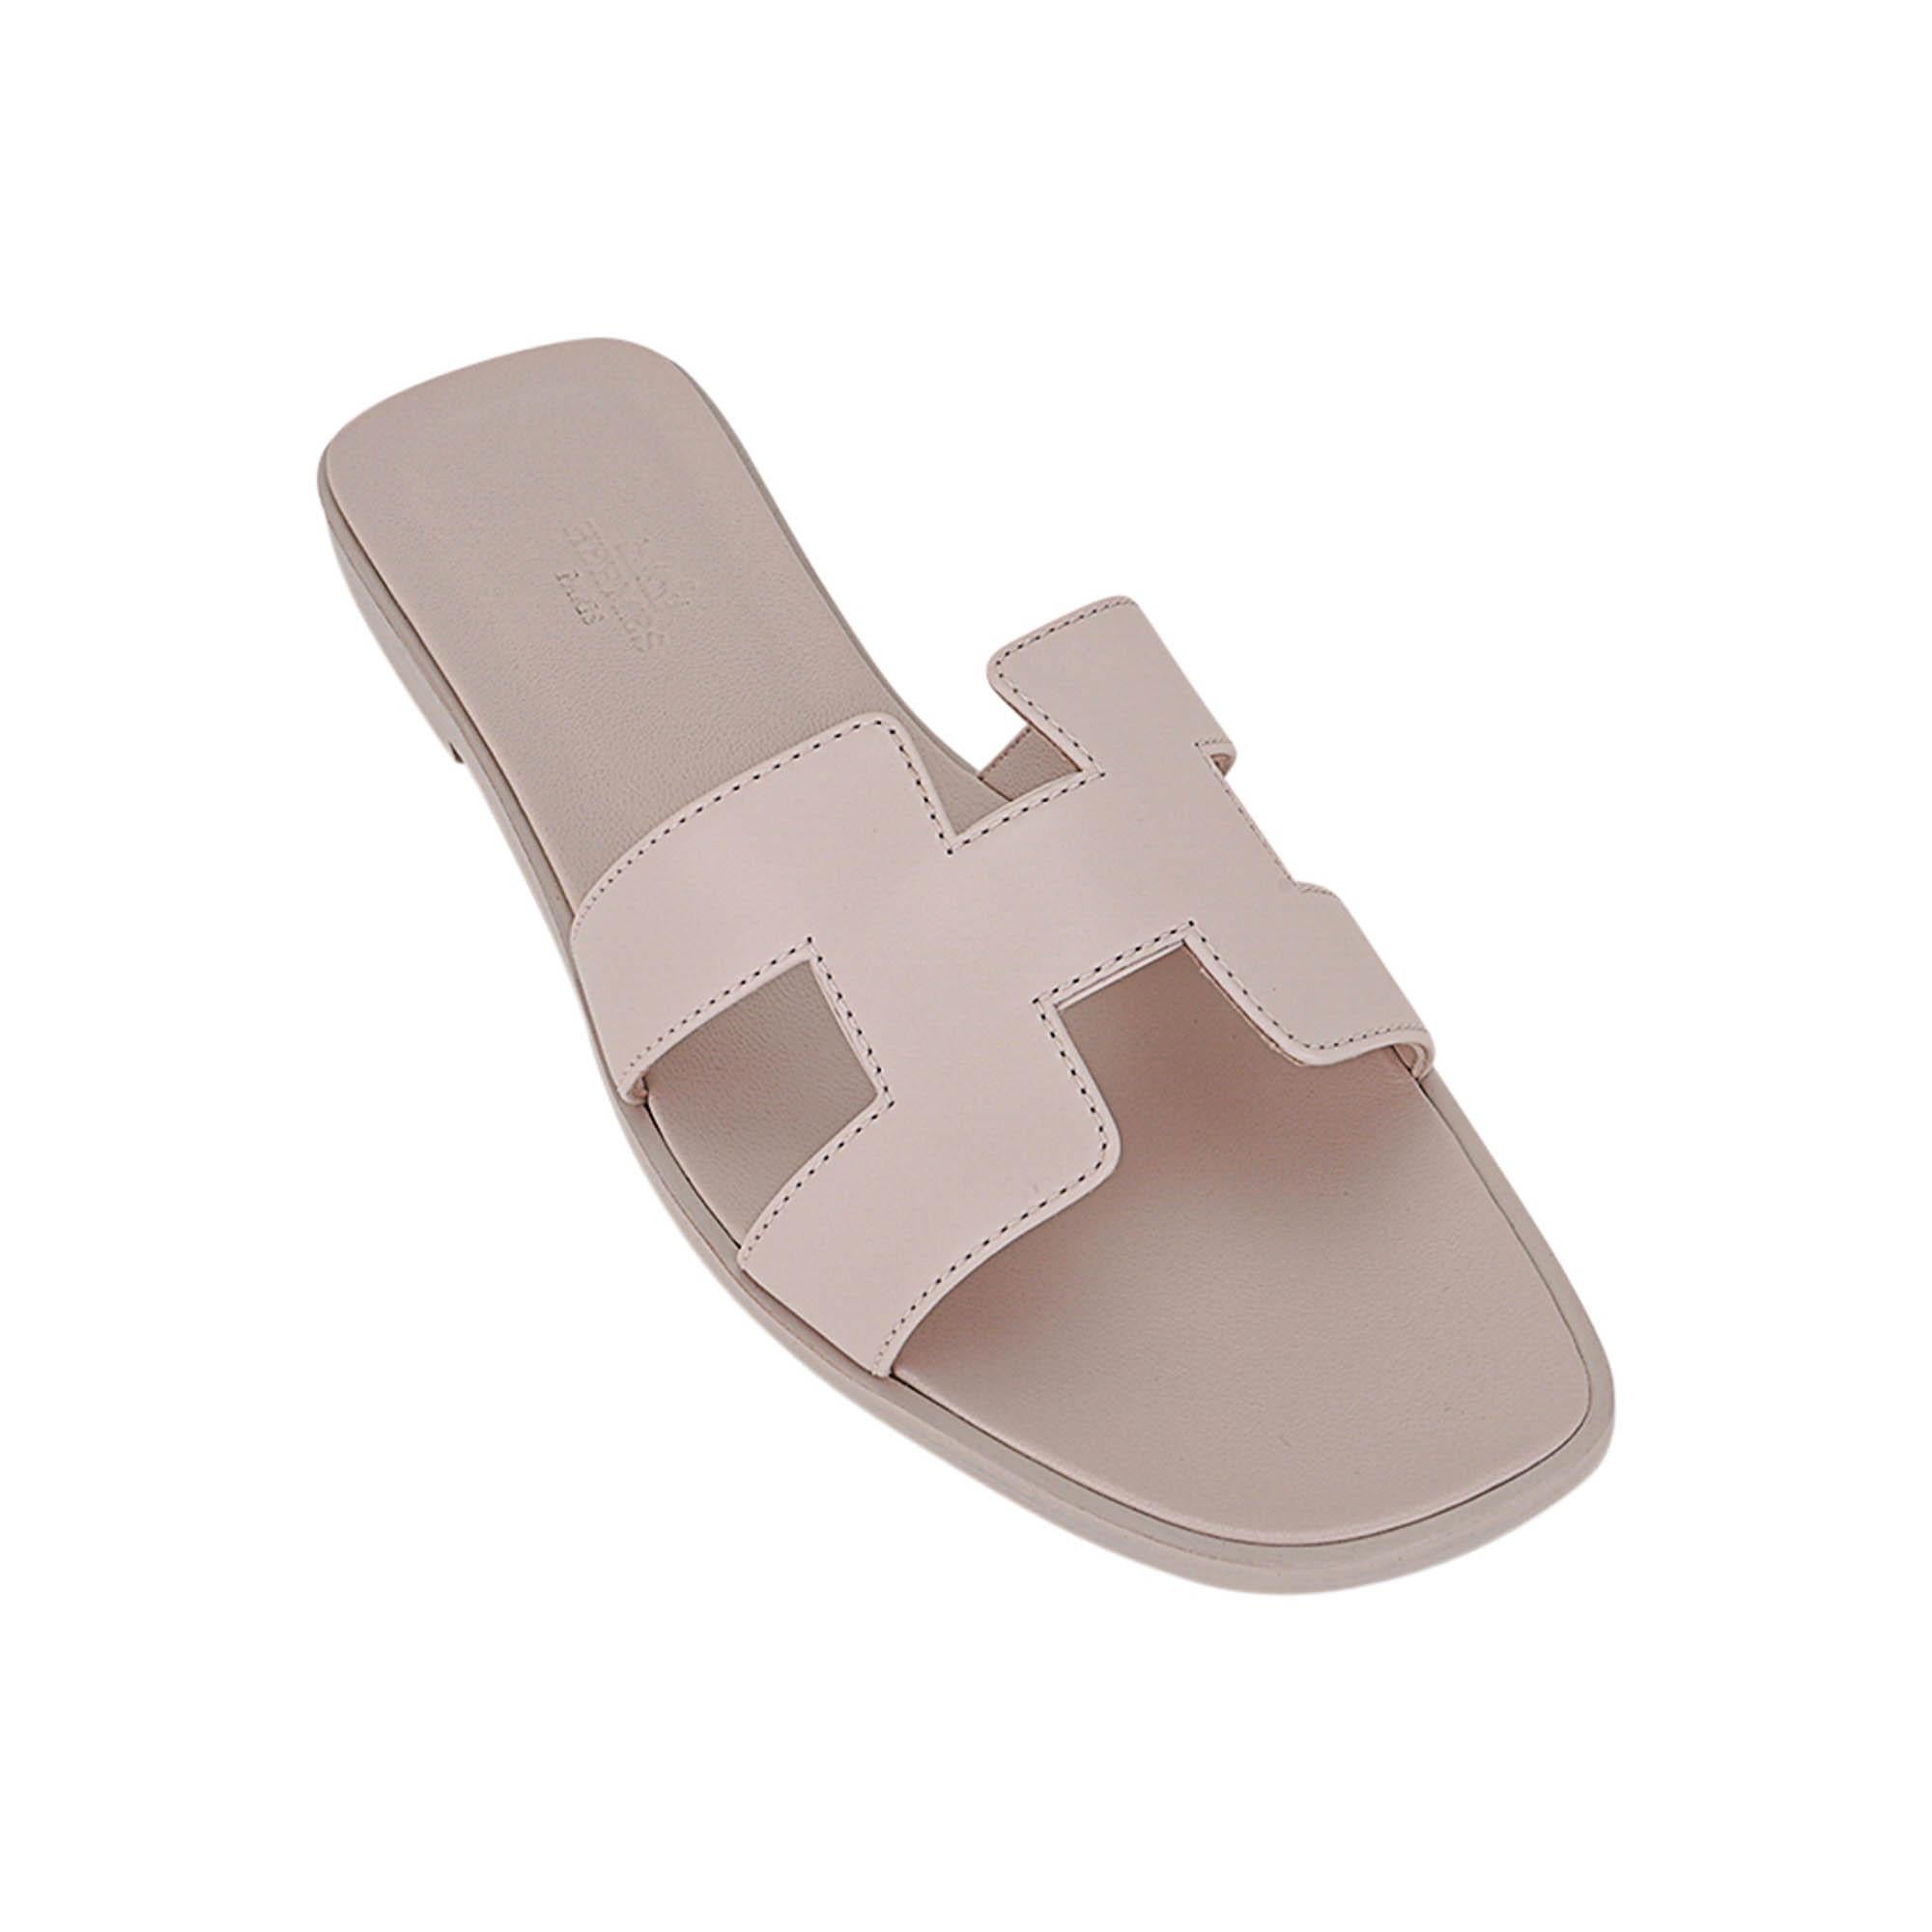 Mightychic offers Hermes Oran sandals featured in exquisite Rose Petale.
The most pale blush of dusty pink in calfskin.
A perfect neutral for your spring and summer wardrobe
Matching embossed calfskin insole. 
Wood heel with leather sole. 
Comes